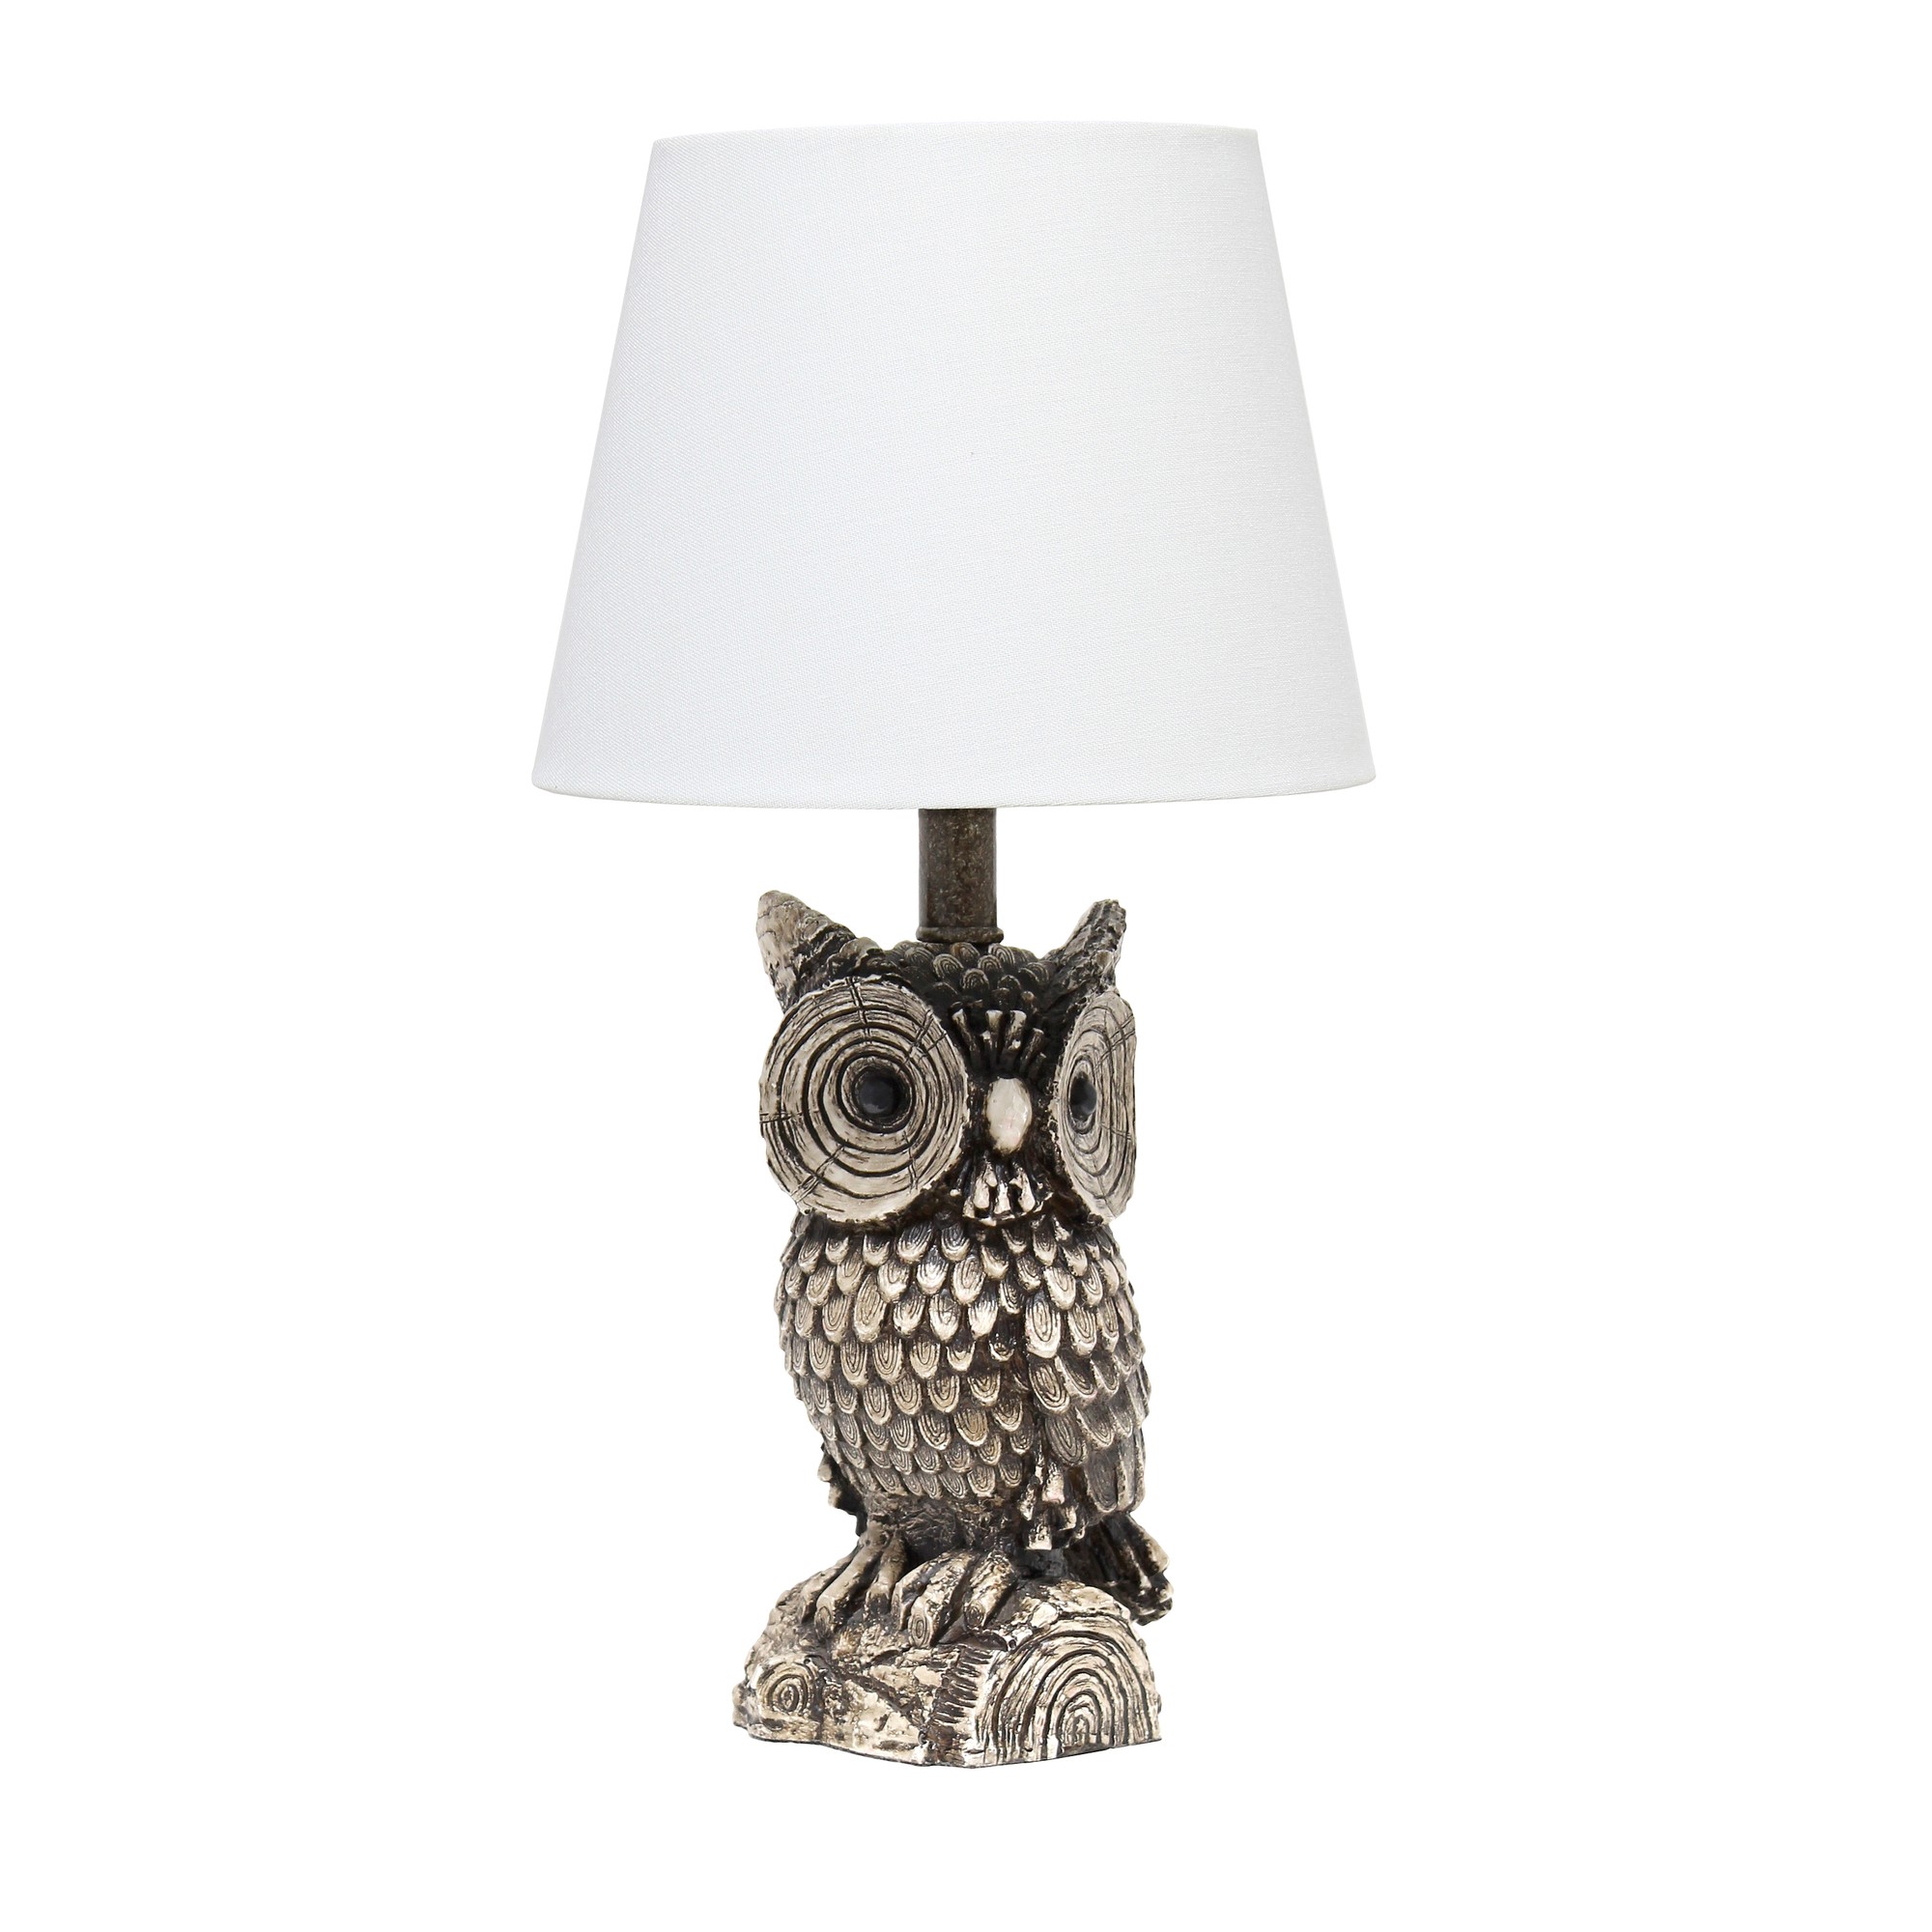 19.85" Brown and White Owl Table Lamp White Shade